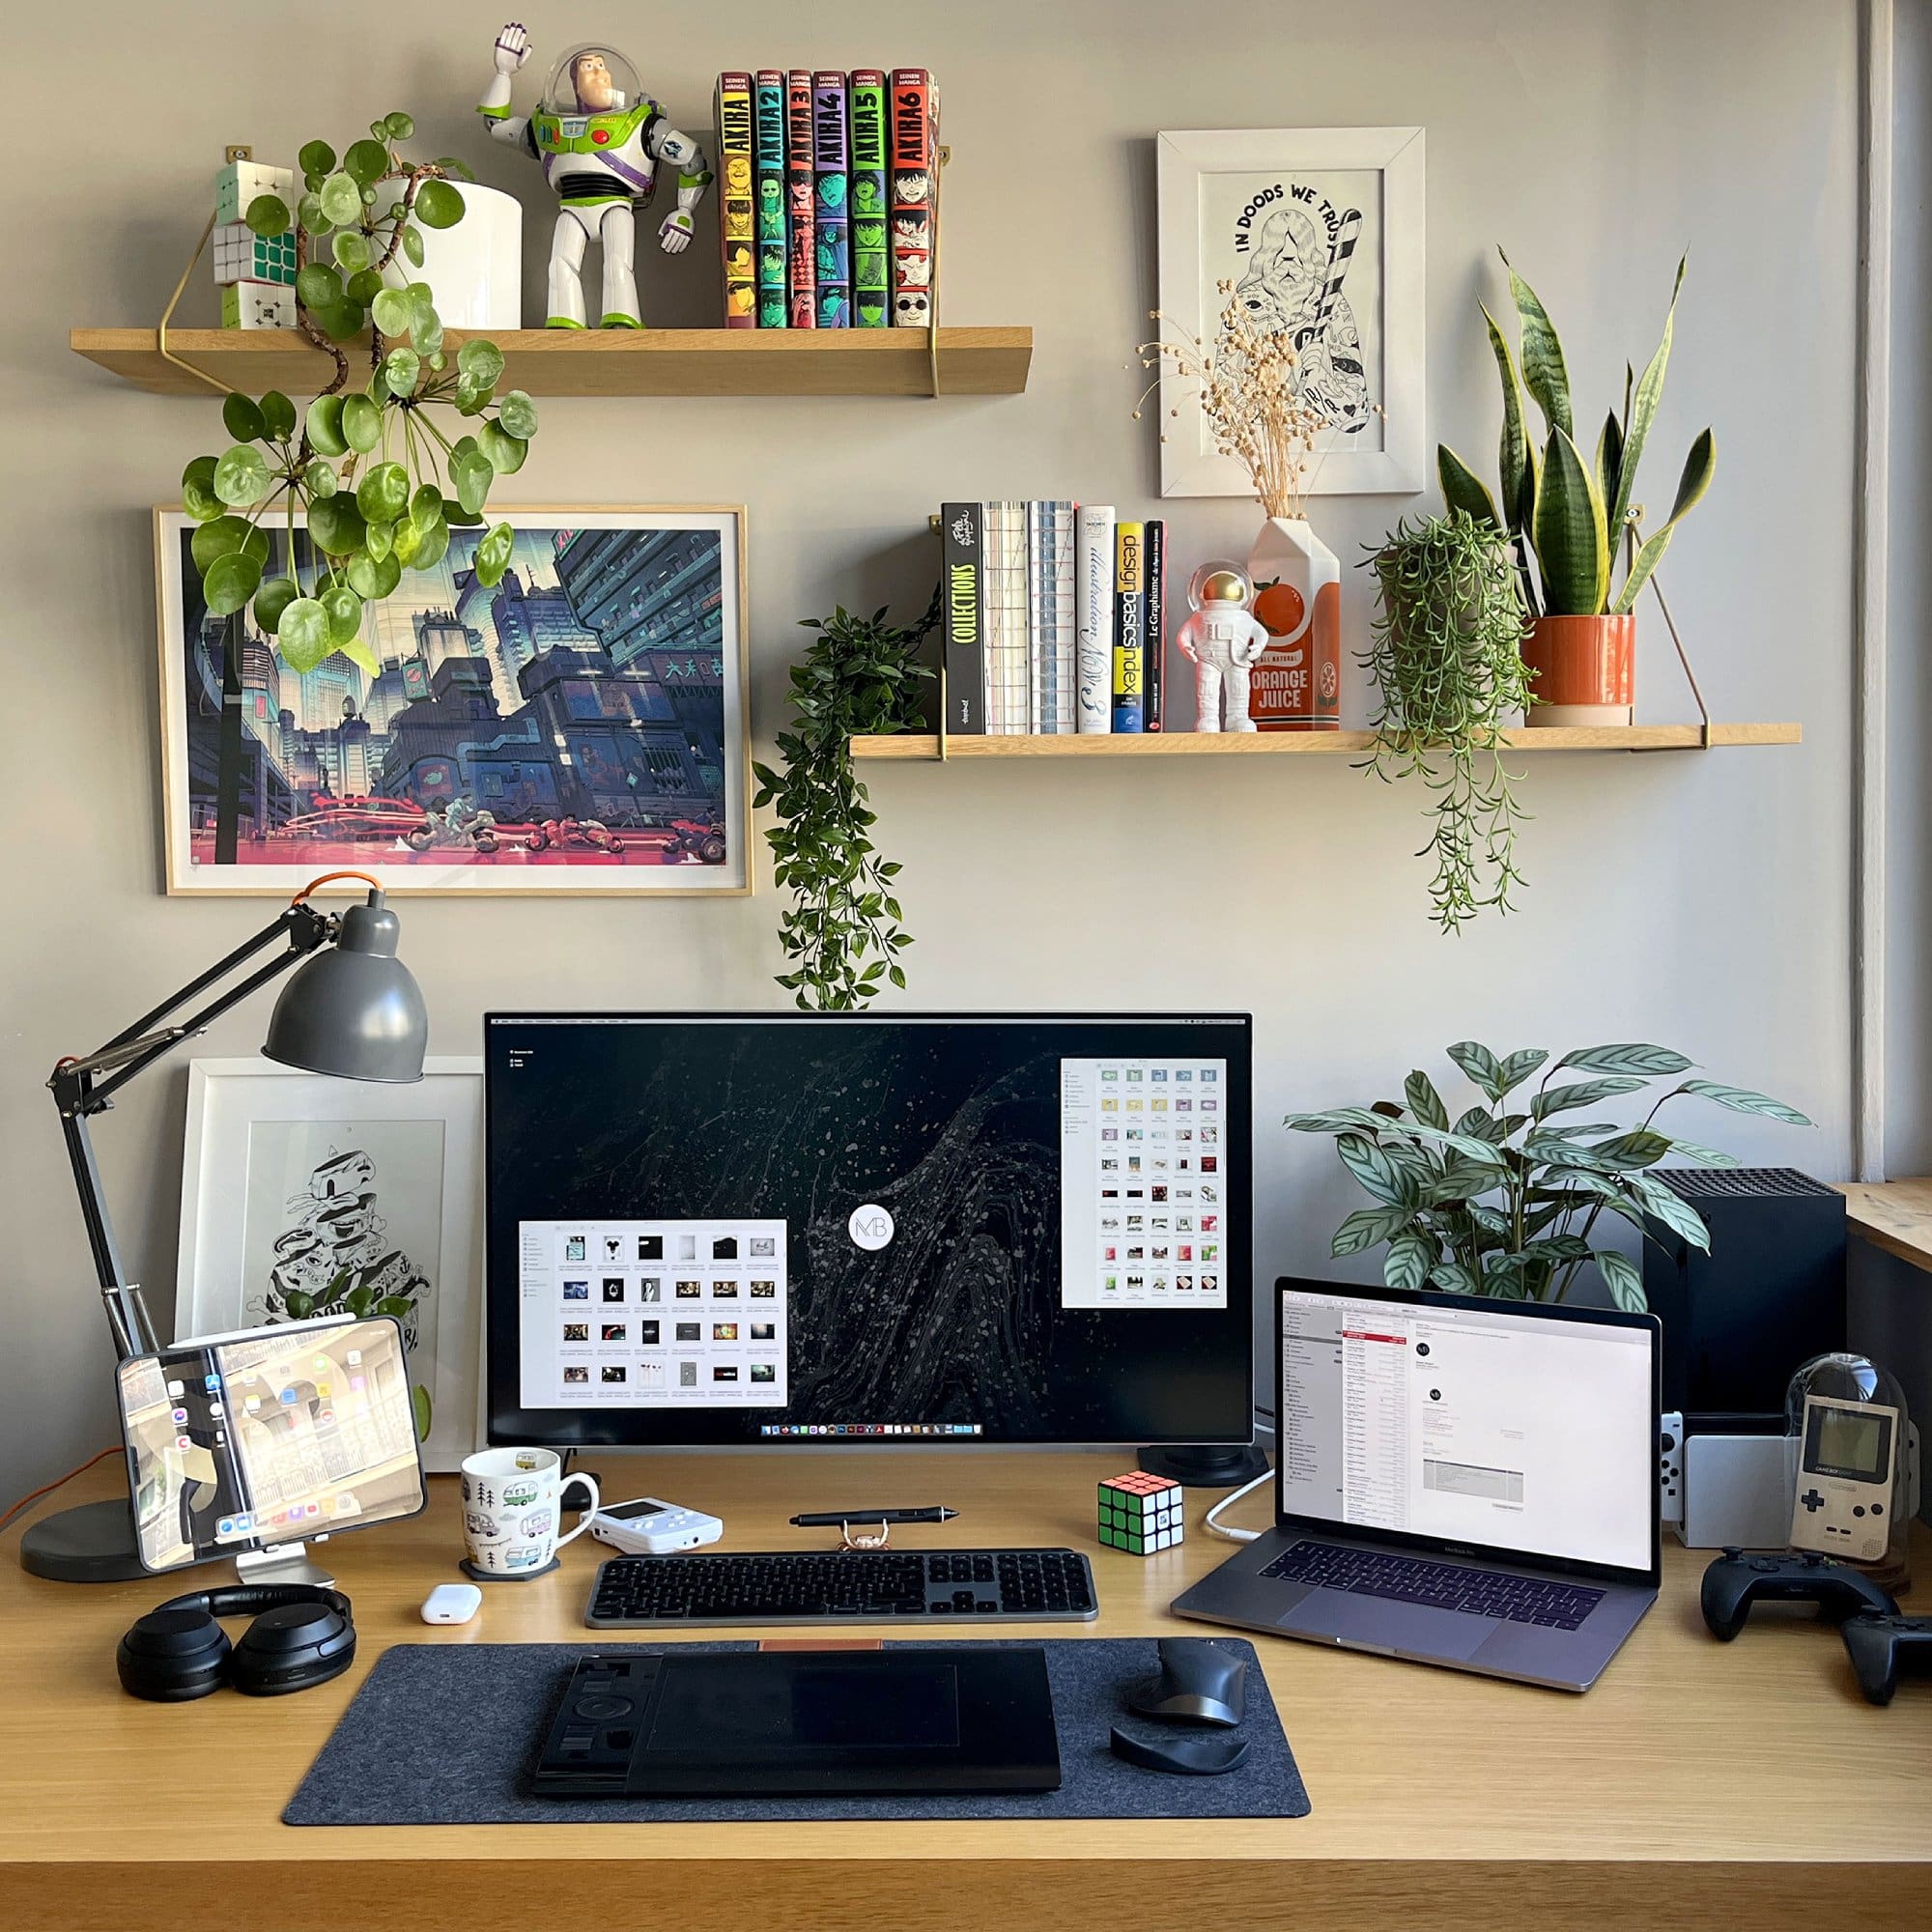 A well-organised graphic designer’s home desk setup with shelves for some plants, comics, books, and figurines on the wall